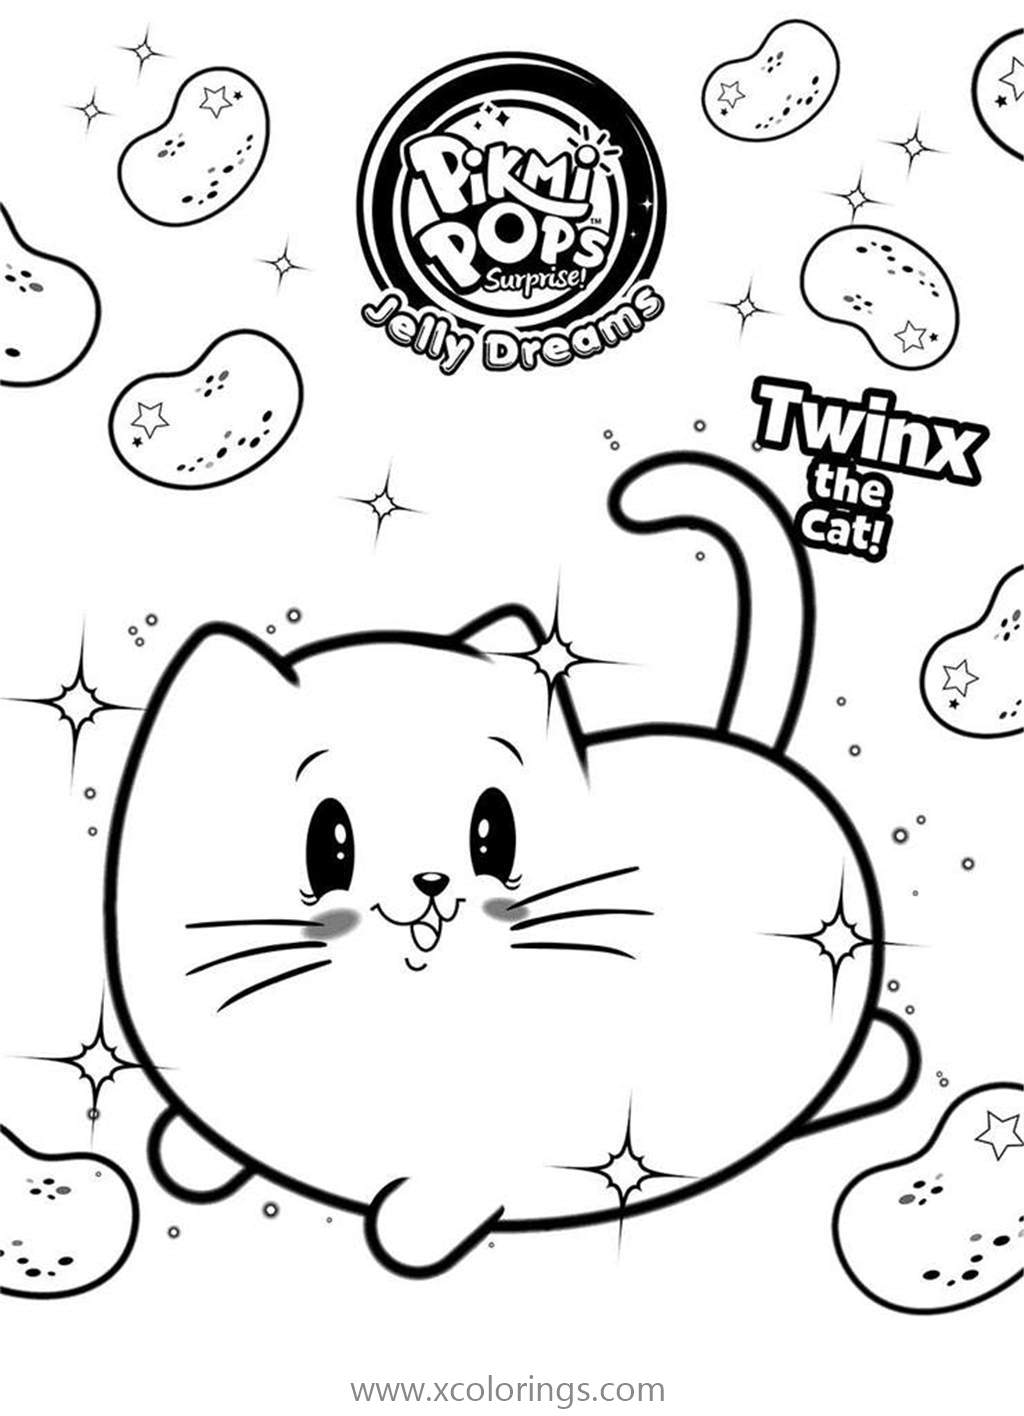 Free Pikmi Pops Twinx the Cat Coloring Pages printable